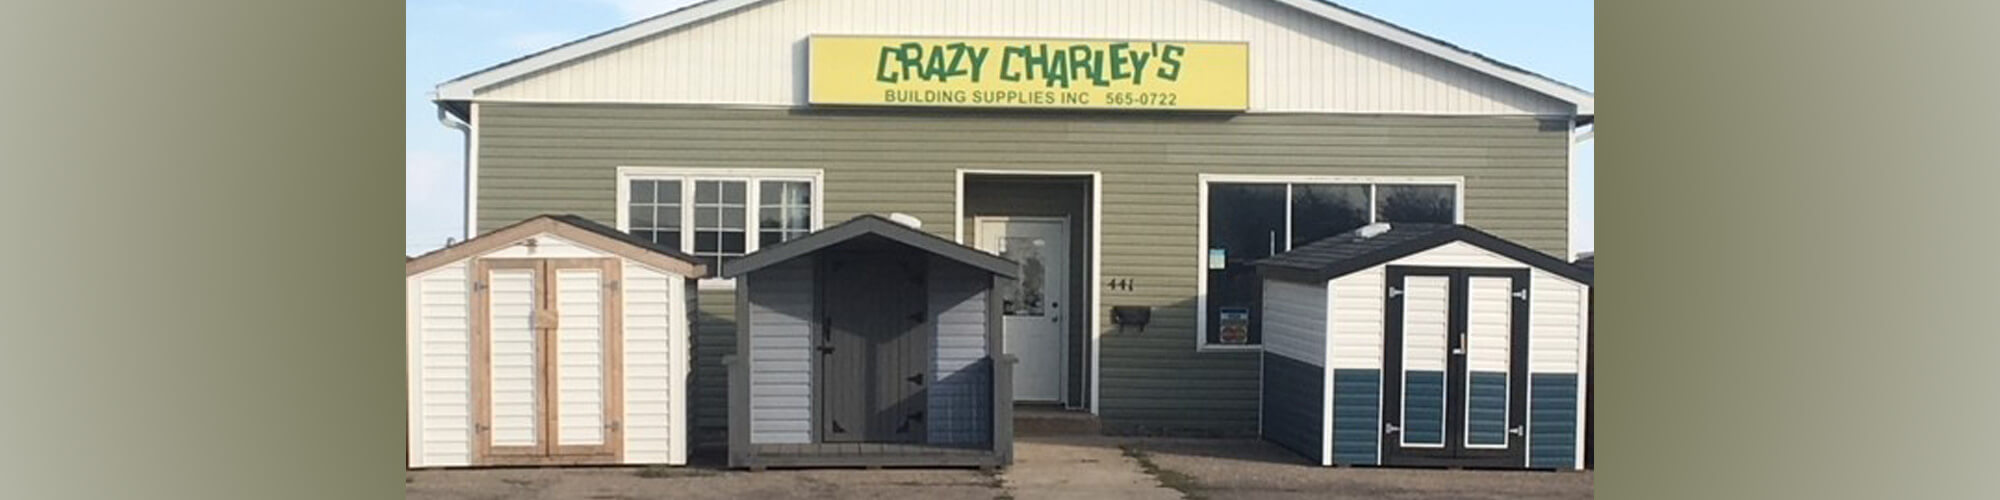 Crazy Charley's Building Supplies Inc